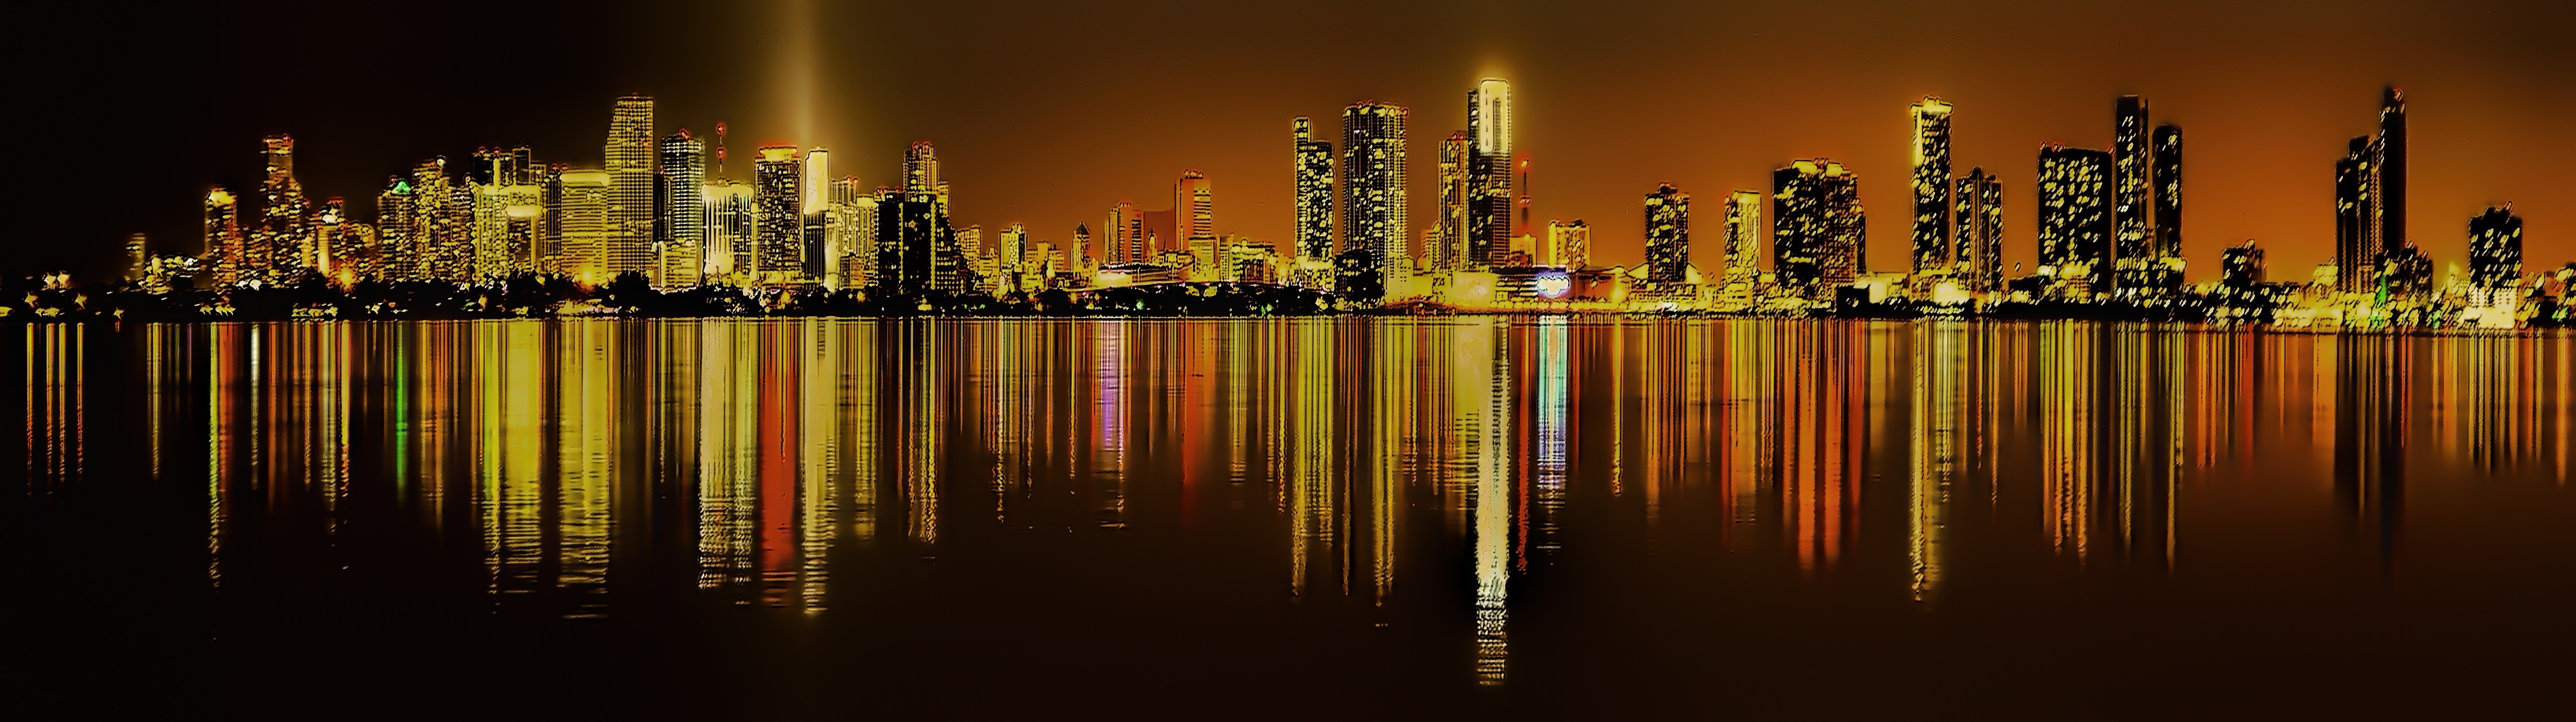 The night city of skyscrapers reflected in the water